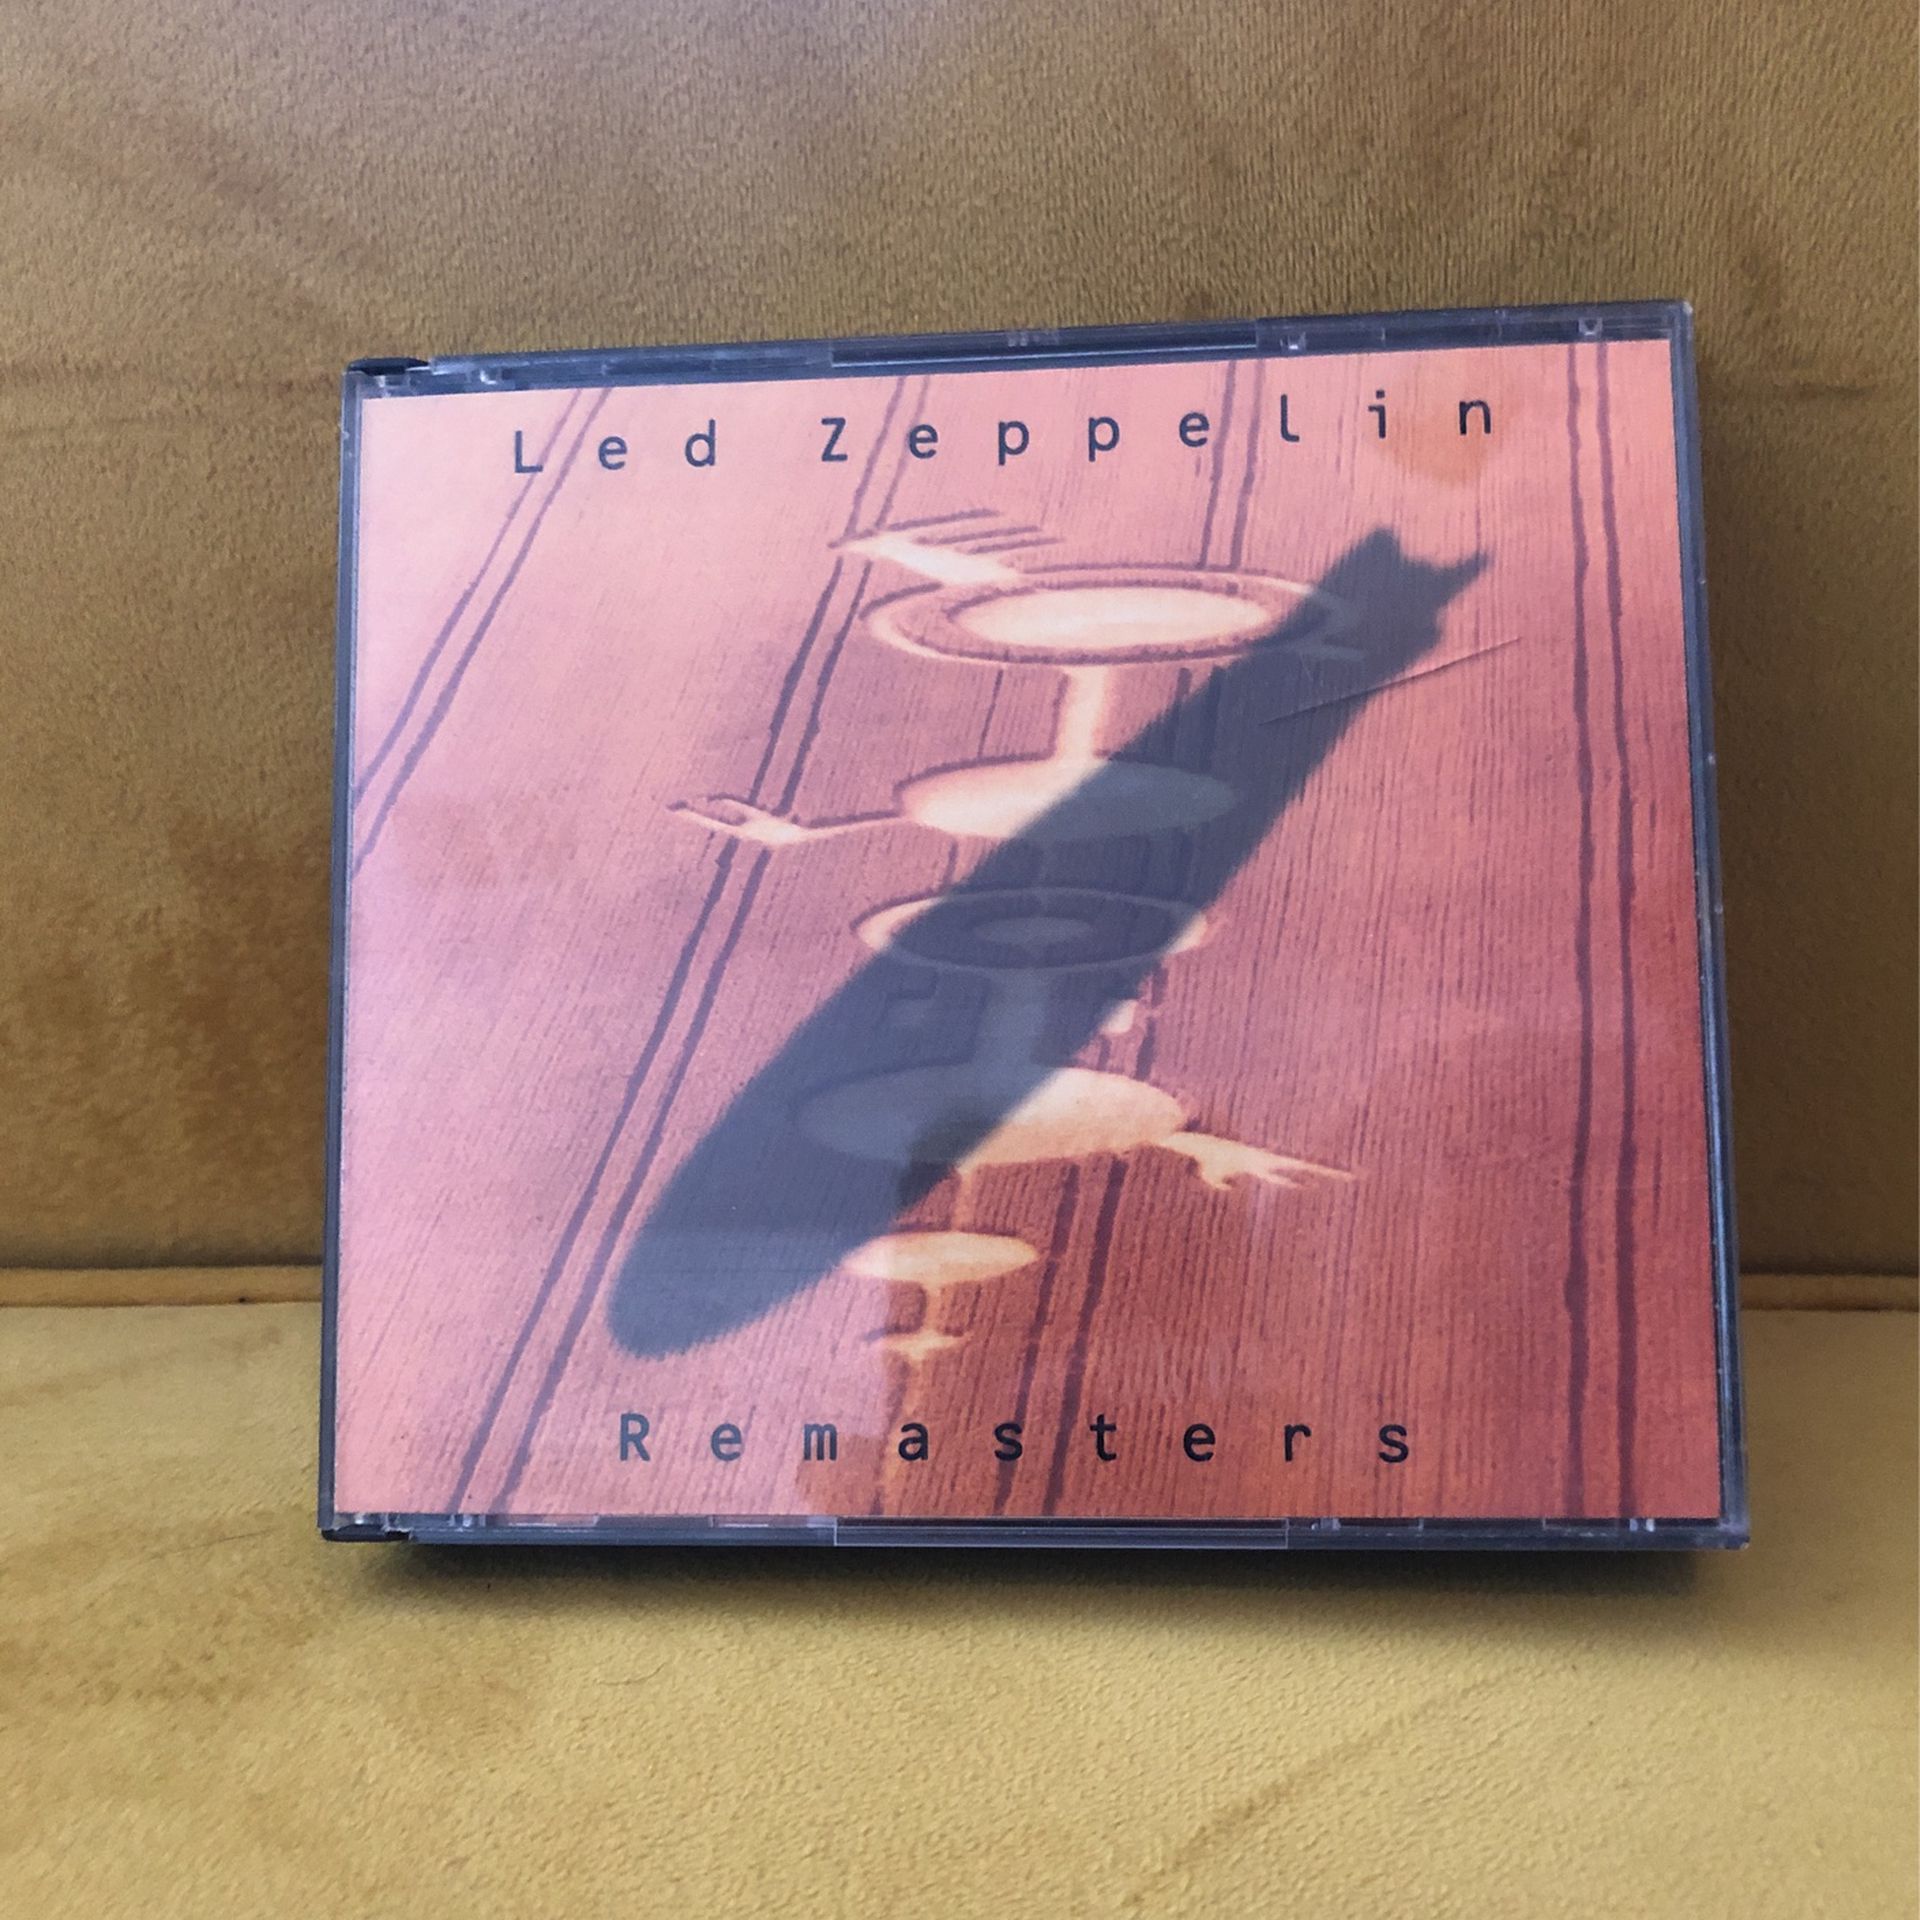 Led Zeppelin Remasters 2 CD set 1990 for Sale in San Antonio, TX